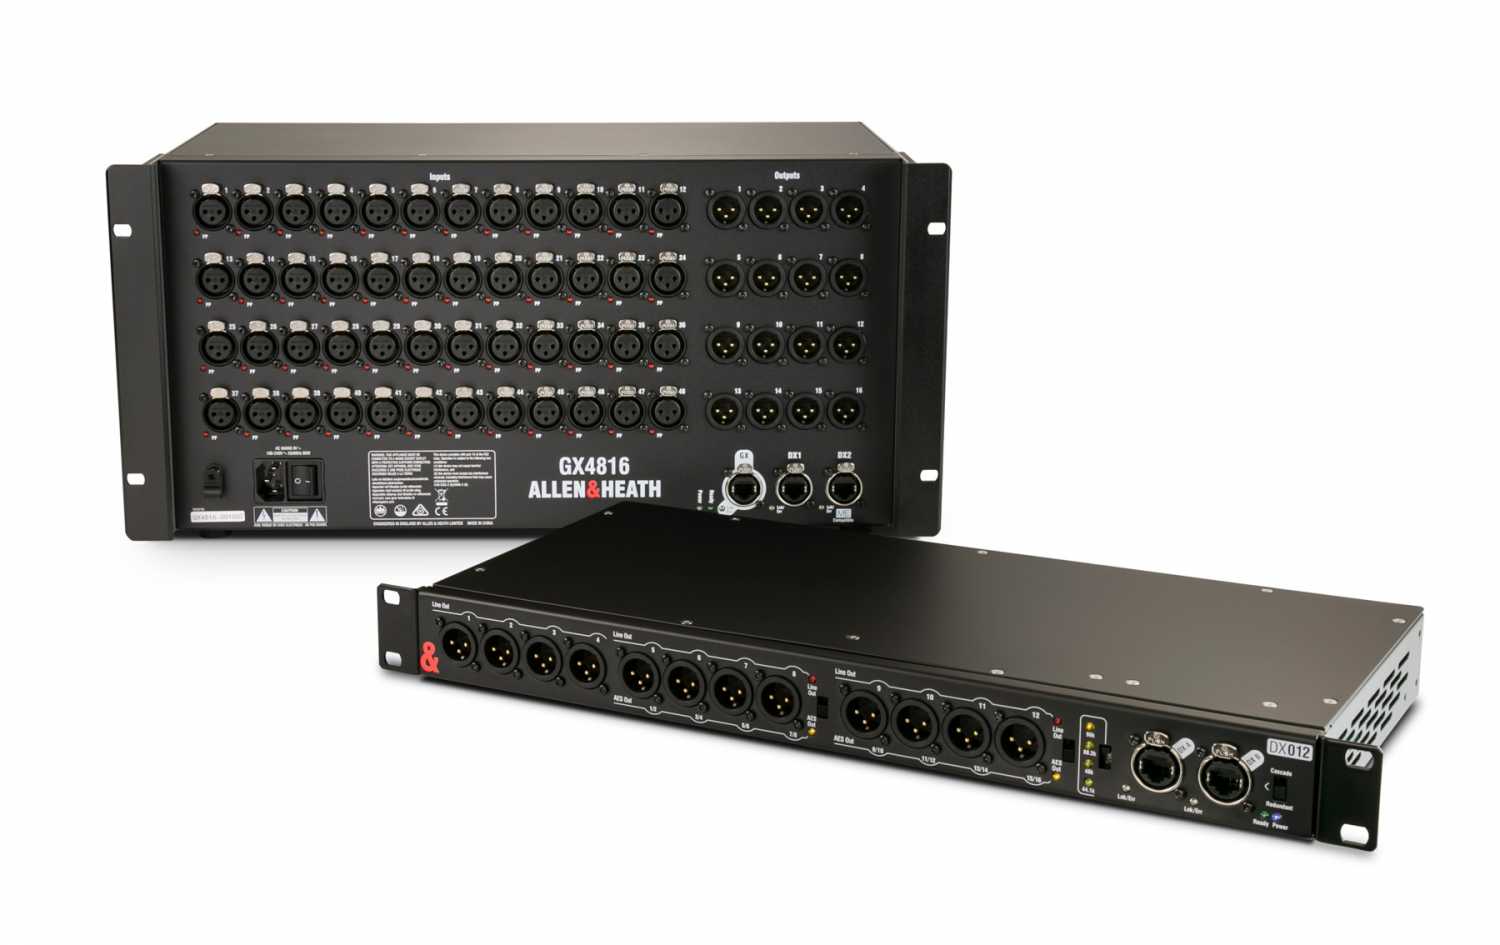 The new units add to an already extensive array of I/O options